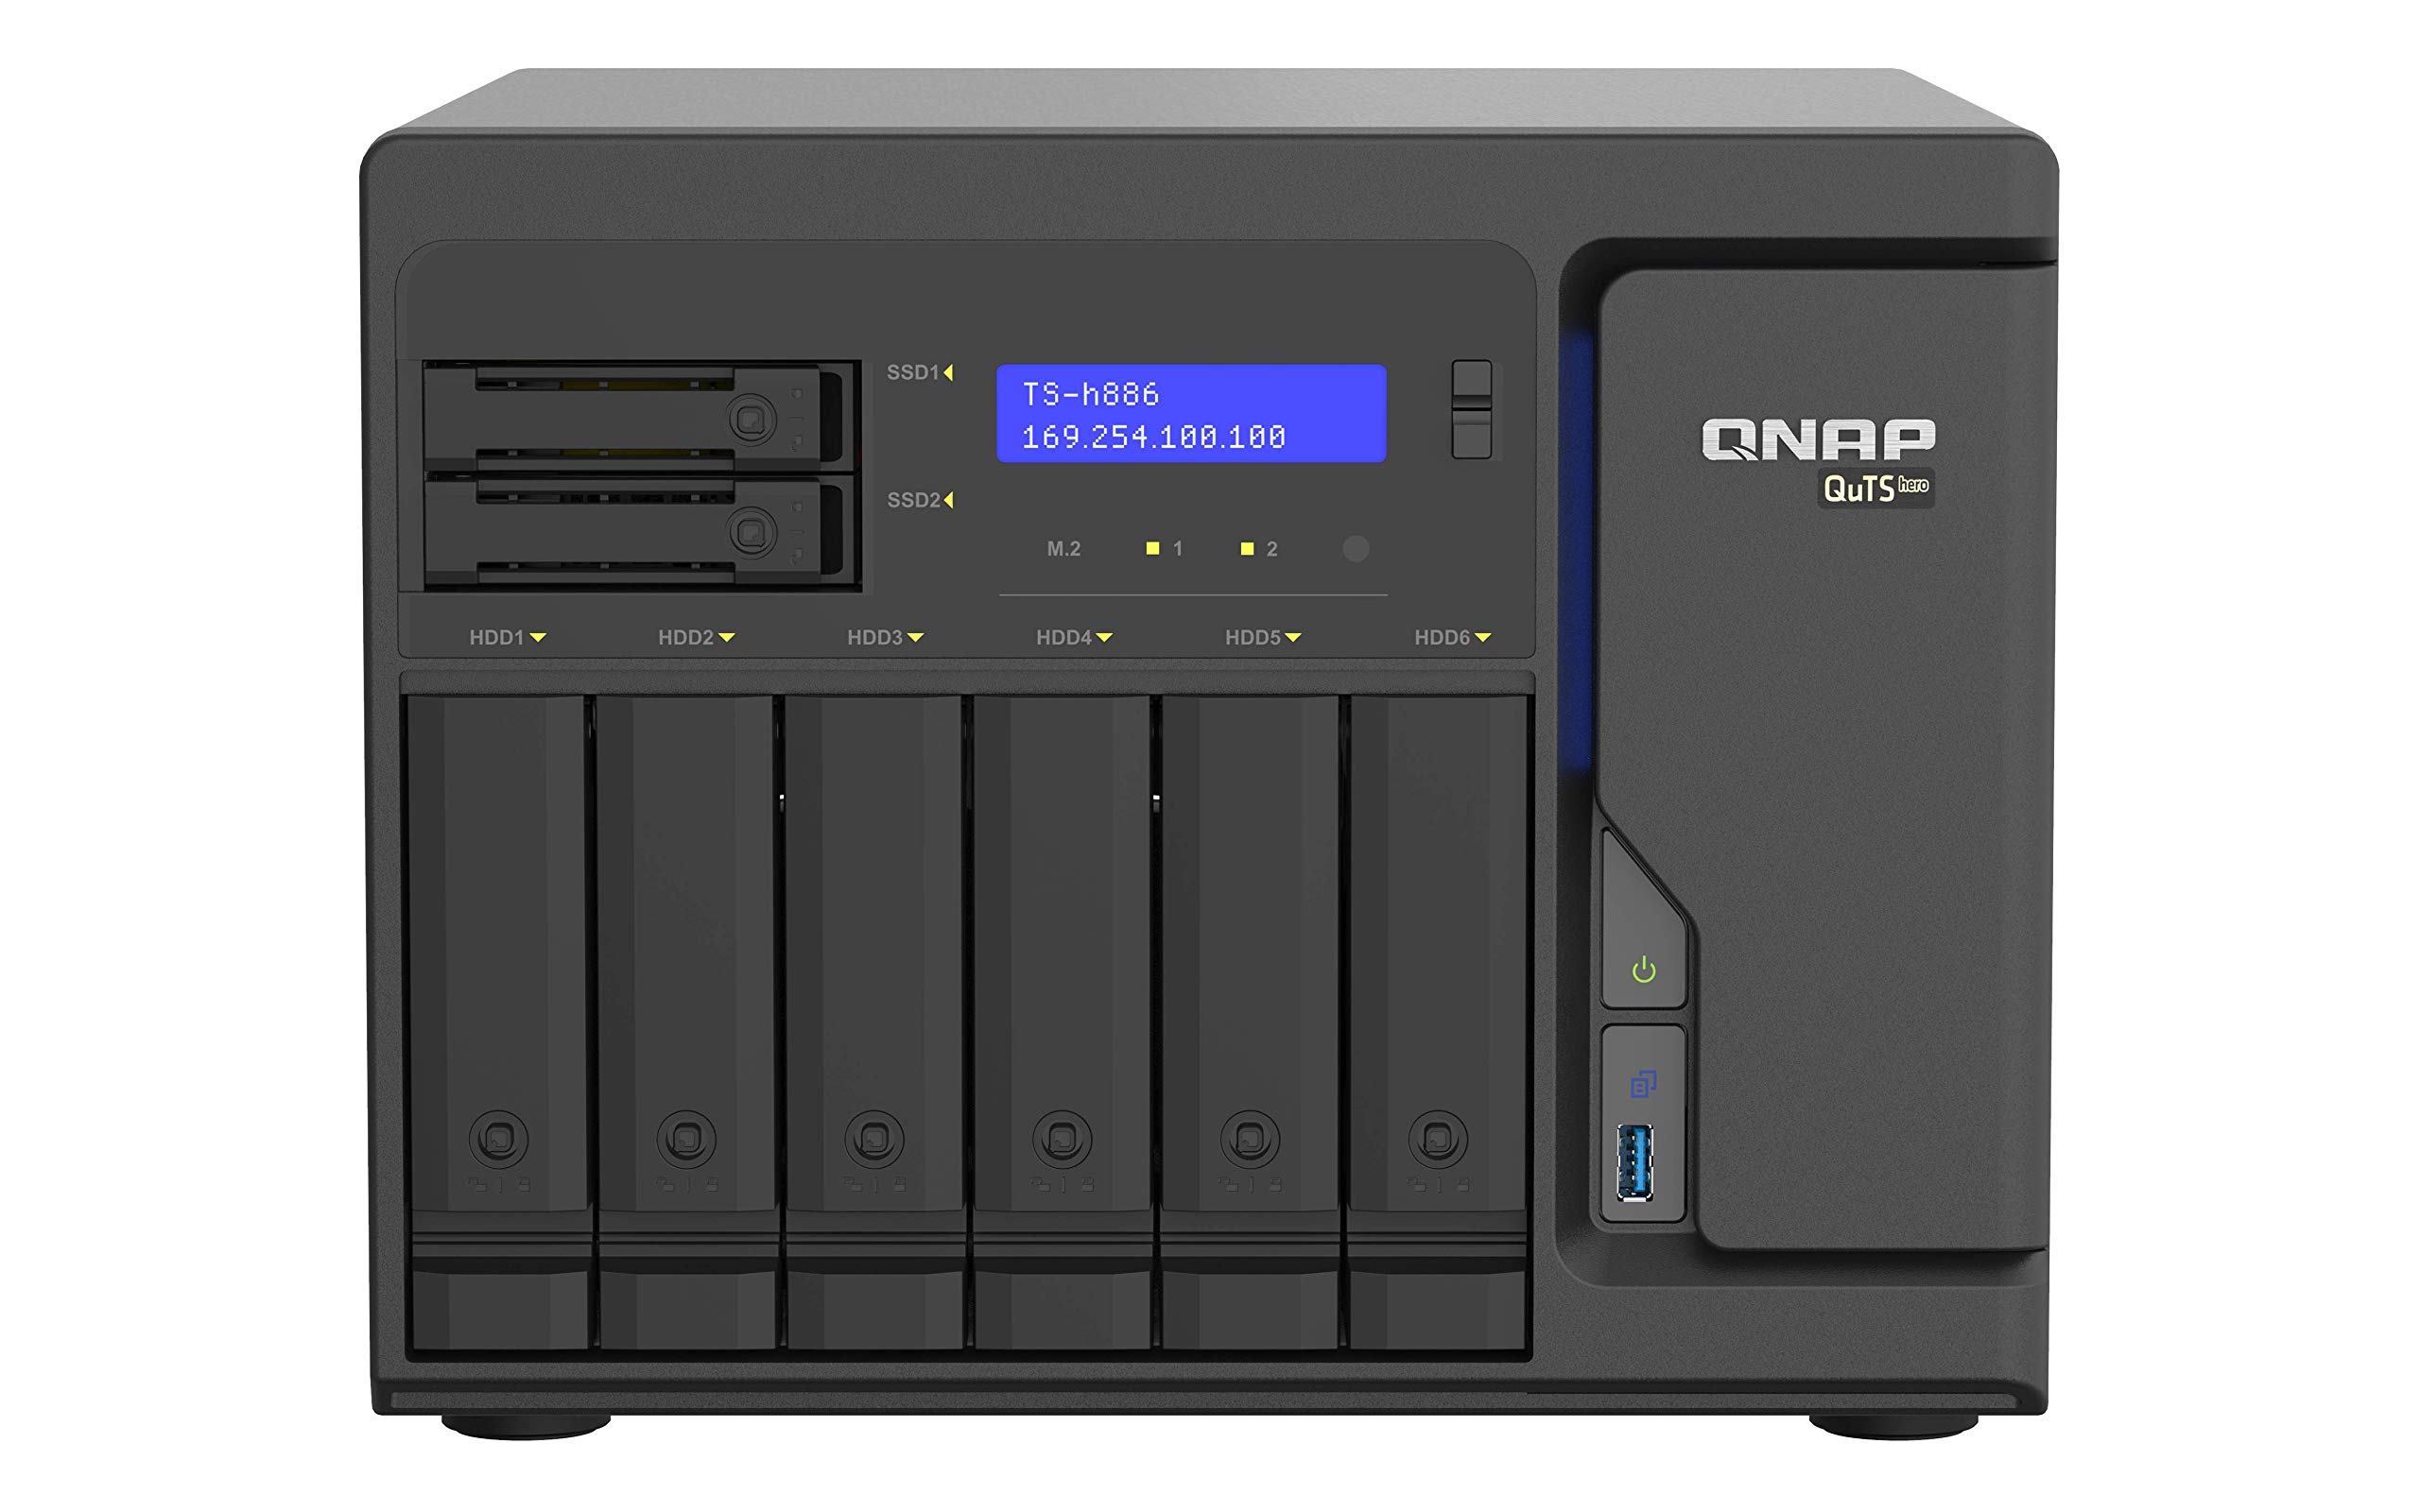 QNAP TS-h886-D1602-8G-US 8 Bay Enterprise NAS with Intel® Xeon® D Desktop QuTS Hero NAS with Four 2.5GbE Ports, Designed for Real-time SnapSync Data Backup and Virtual Machine Applications